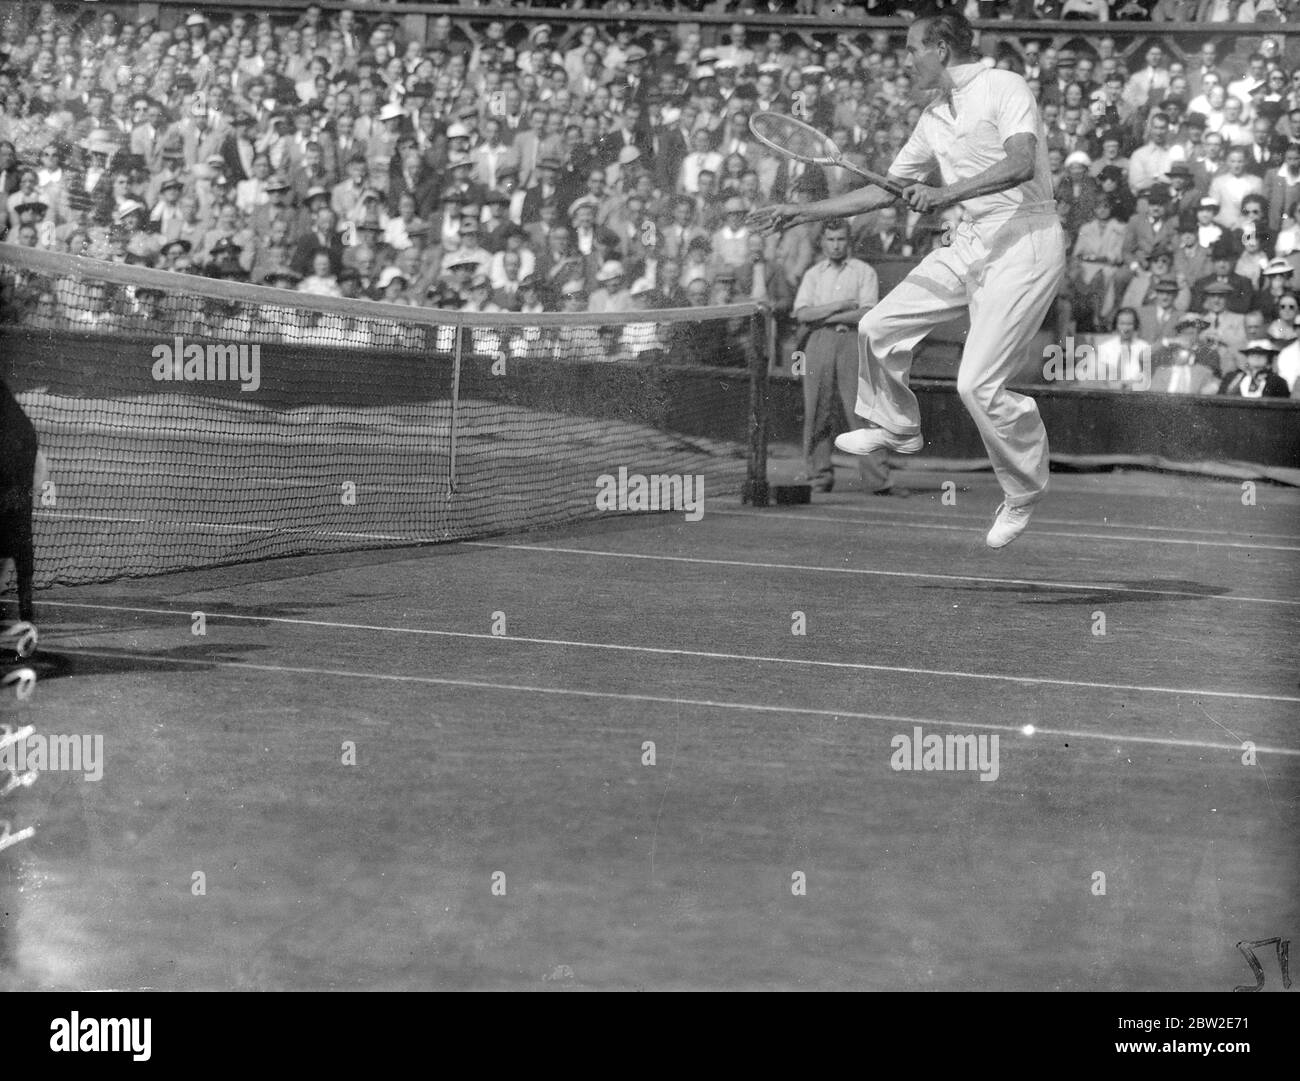 Hare leaps to take a shot during the match. Hare beat Budge to become Wimbledon champion winning 13-15 in their singles match in the Davis cup challenge round at Wimbledon. 24 July 1937 Stock Photo